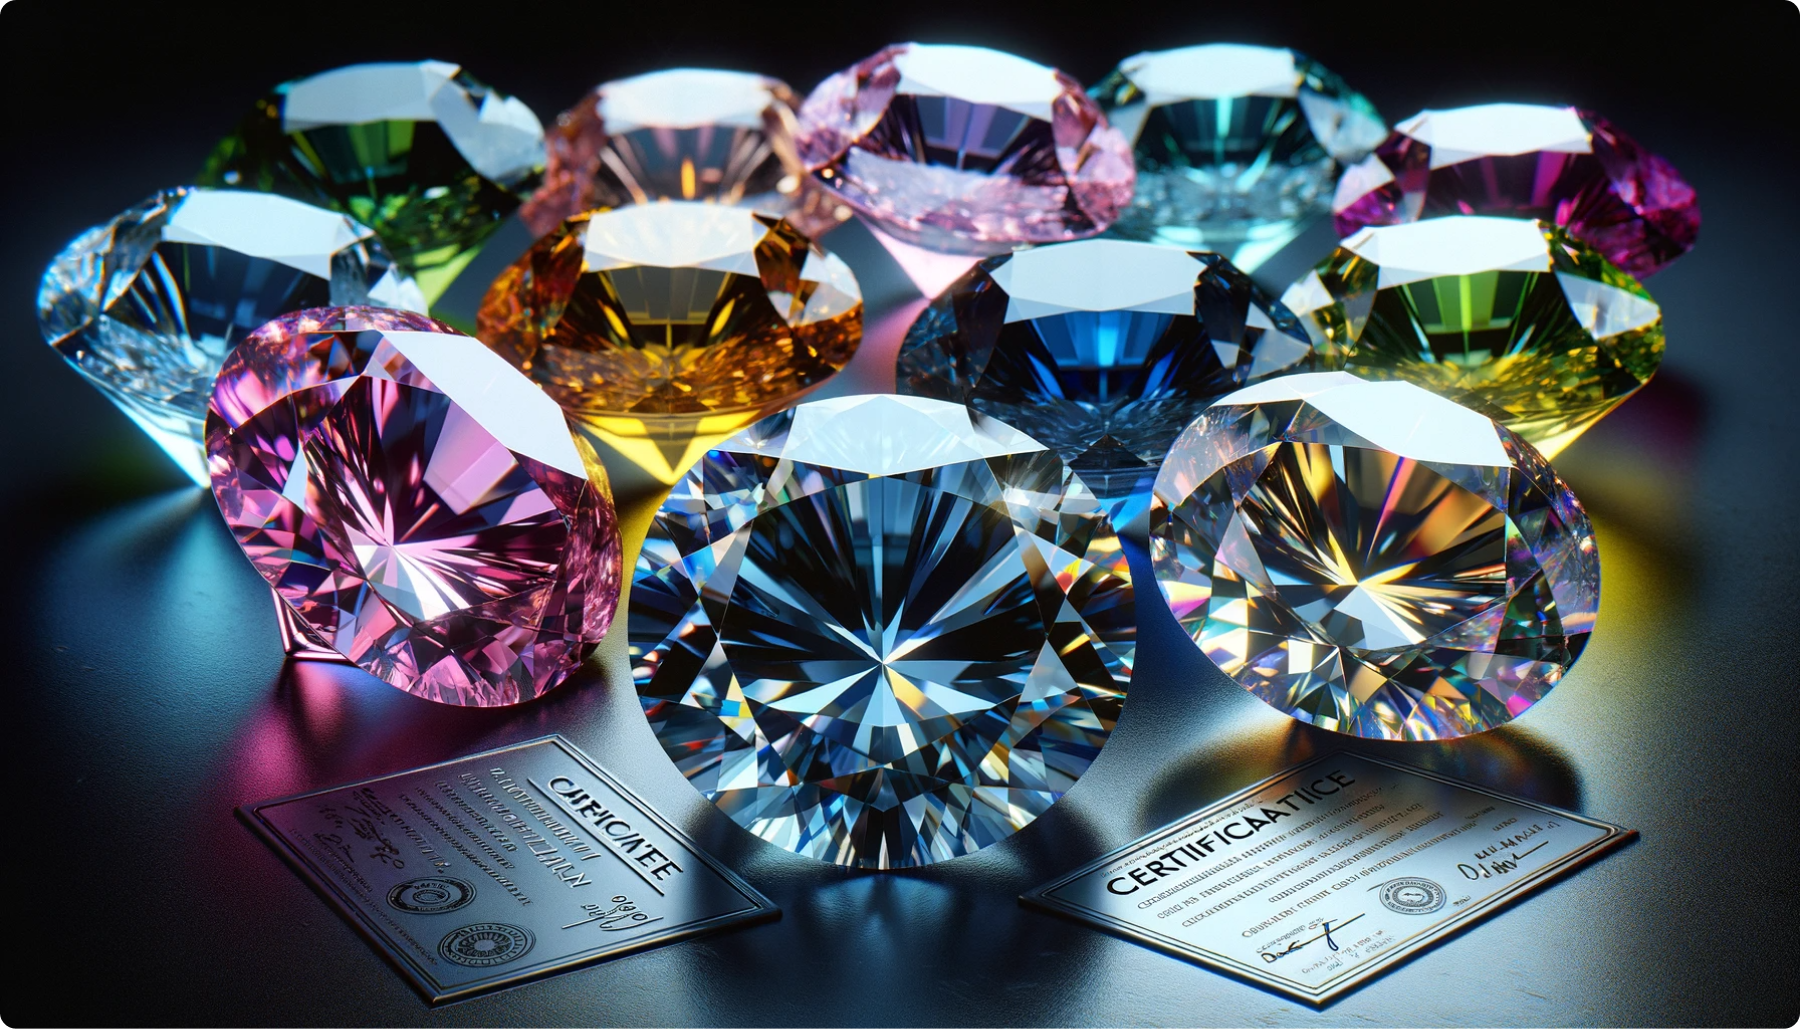 A stunning array of colored diamonds with their certification labels.